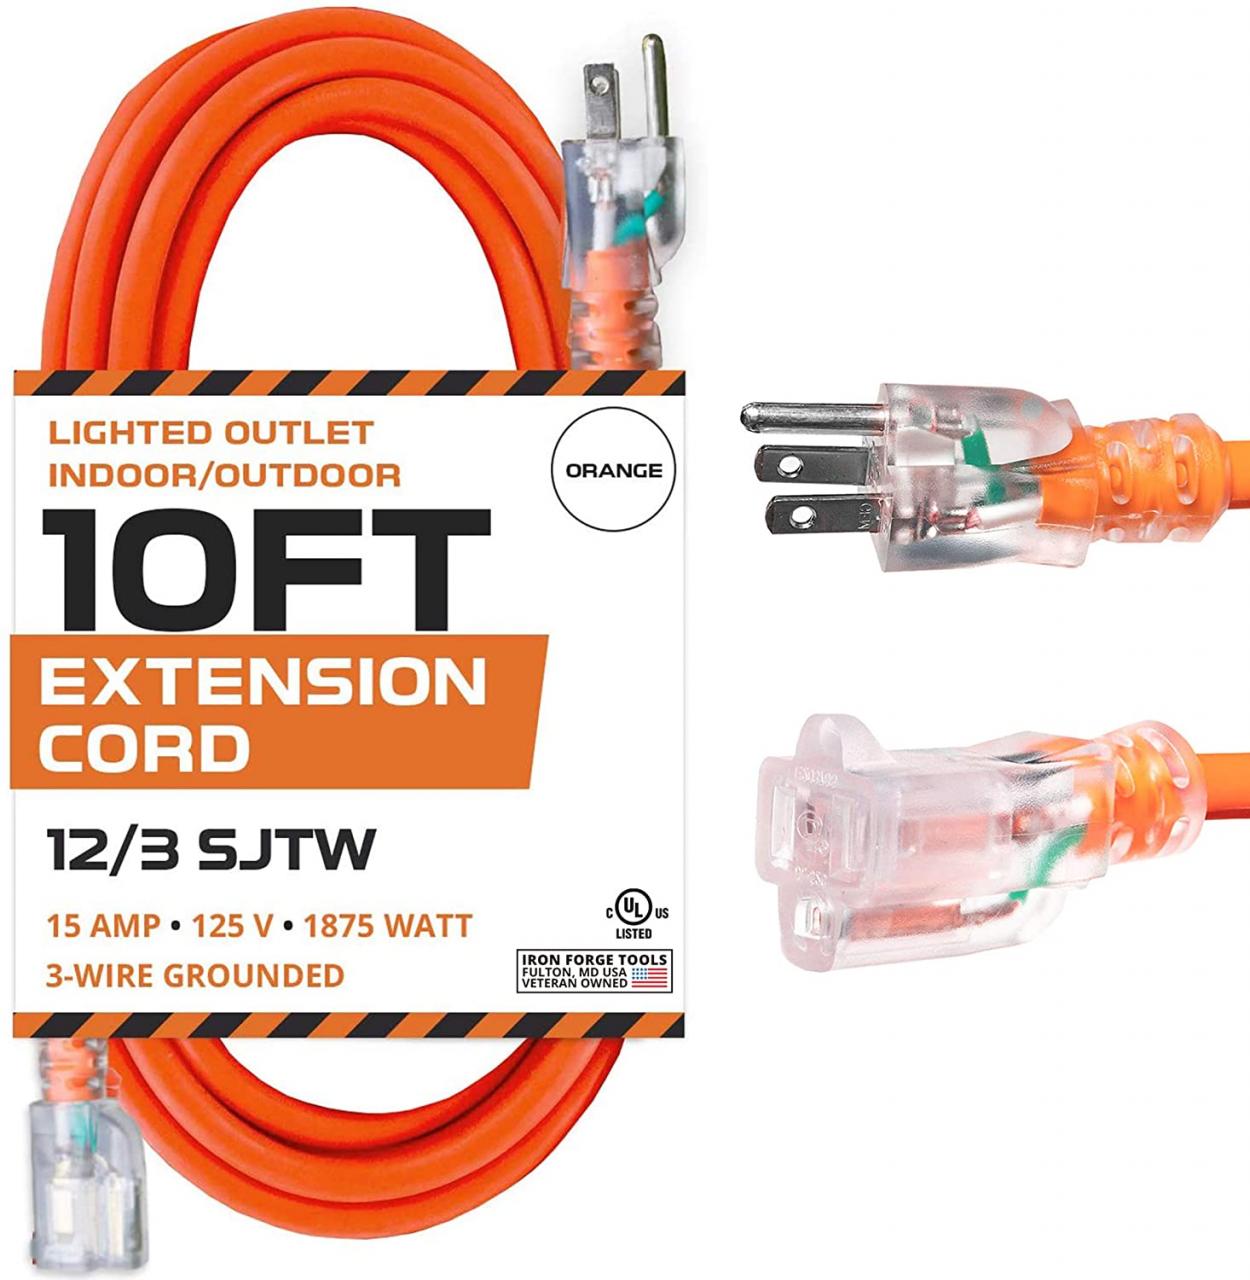 Buy 10 Ft Orange Extension Cord - 12/3 SJTW Heavy Duty Lighted Outdoor  Extension Cable with 3 Prong Grounded Plug for Safety - Great for Garden &  Major Appliances Online in Turkey. B07Q5HL4SQ